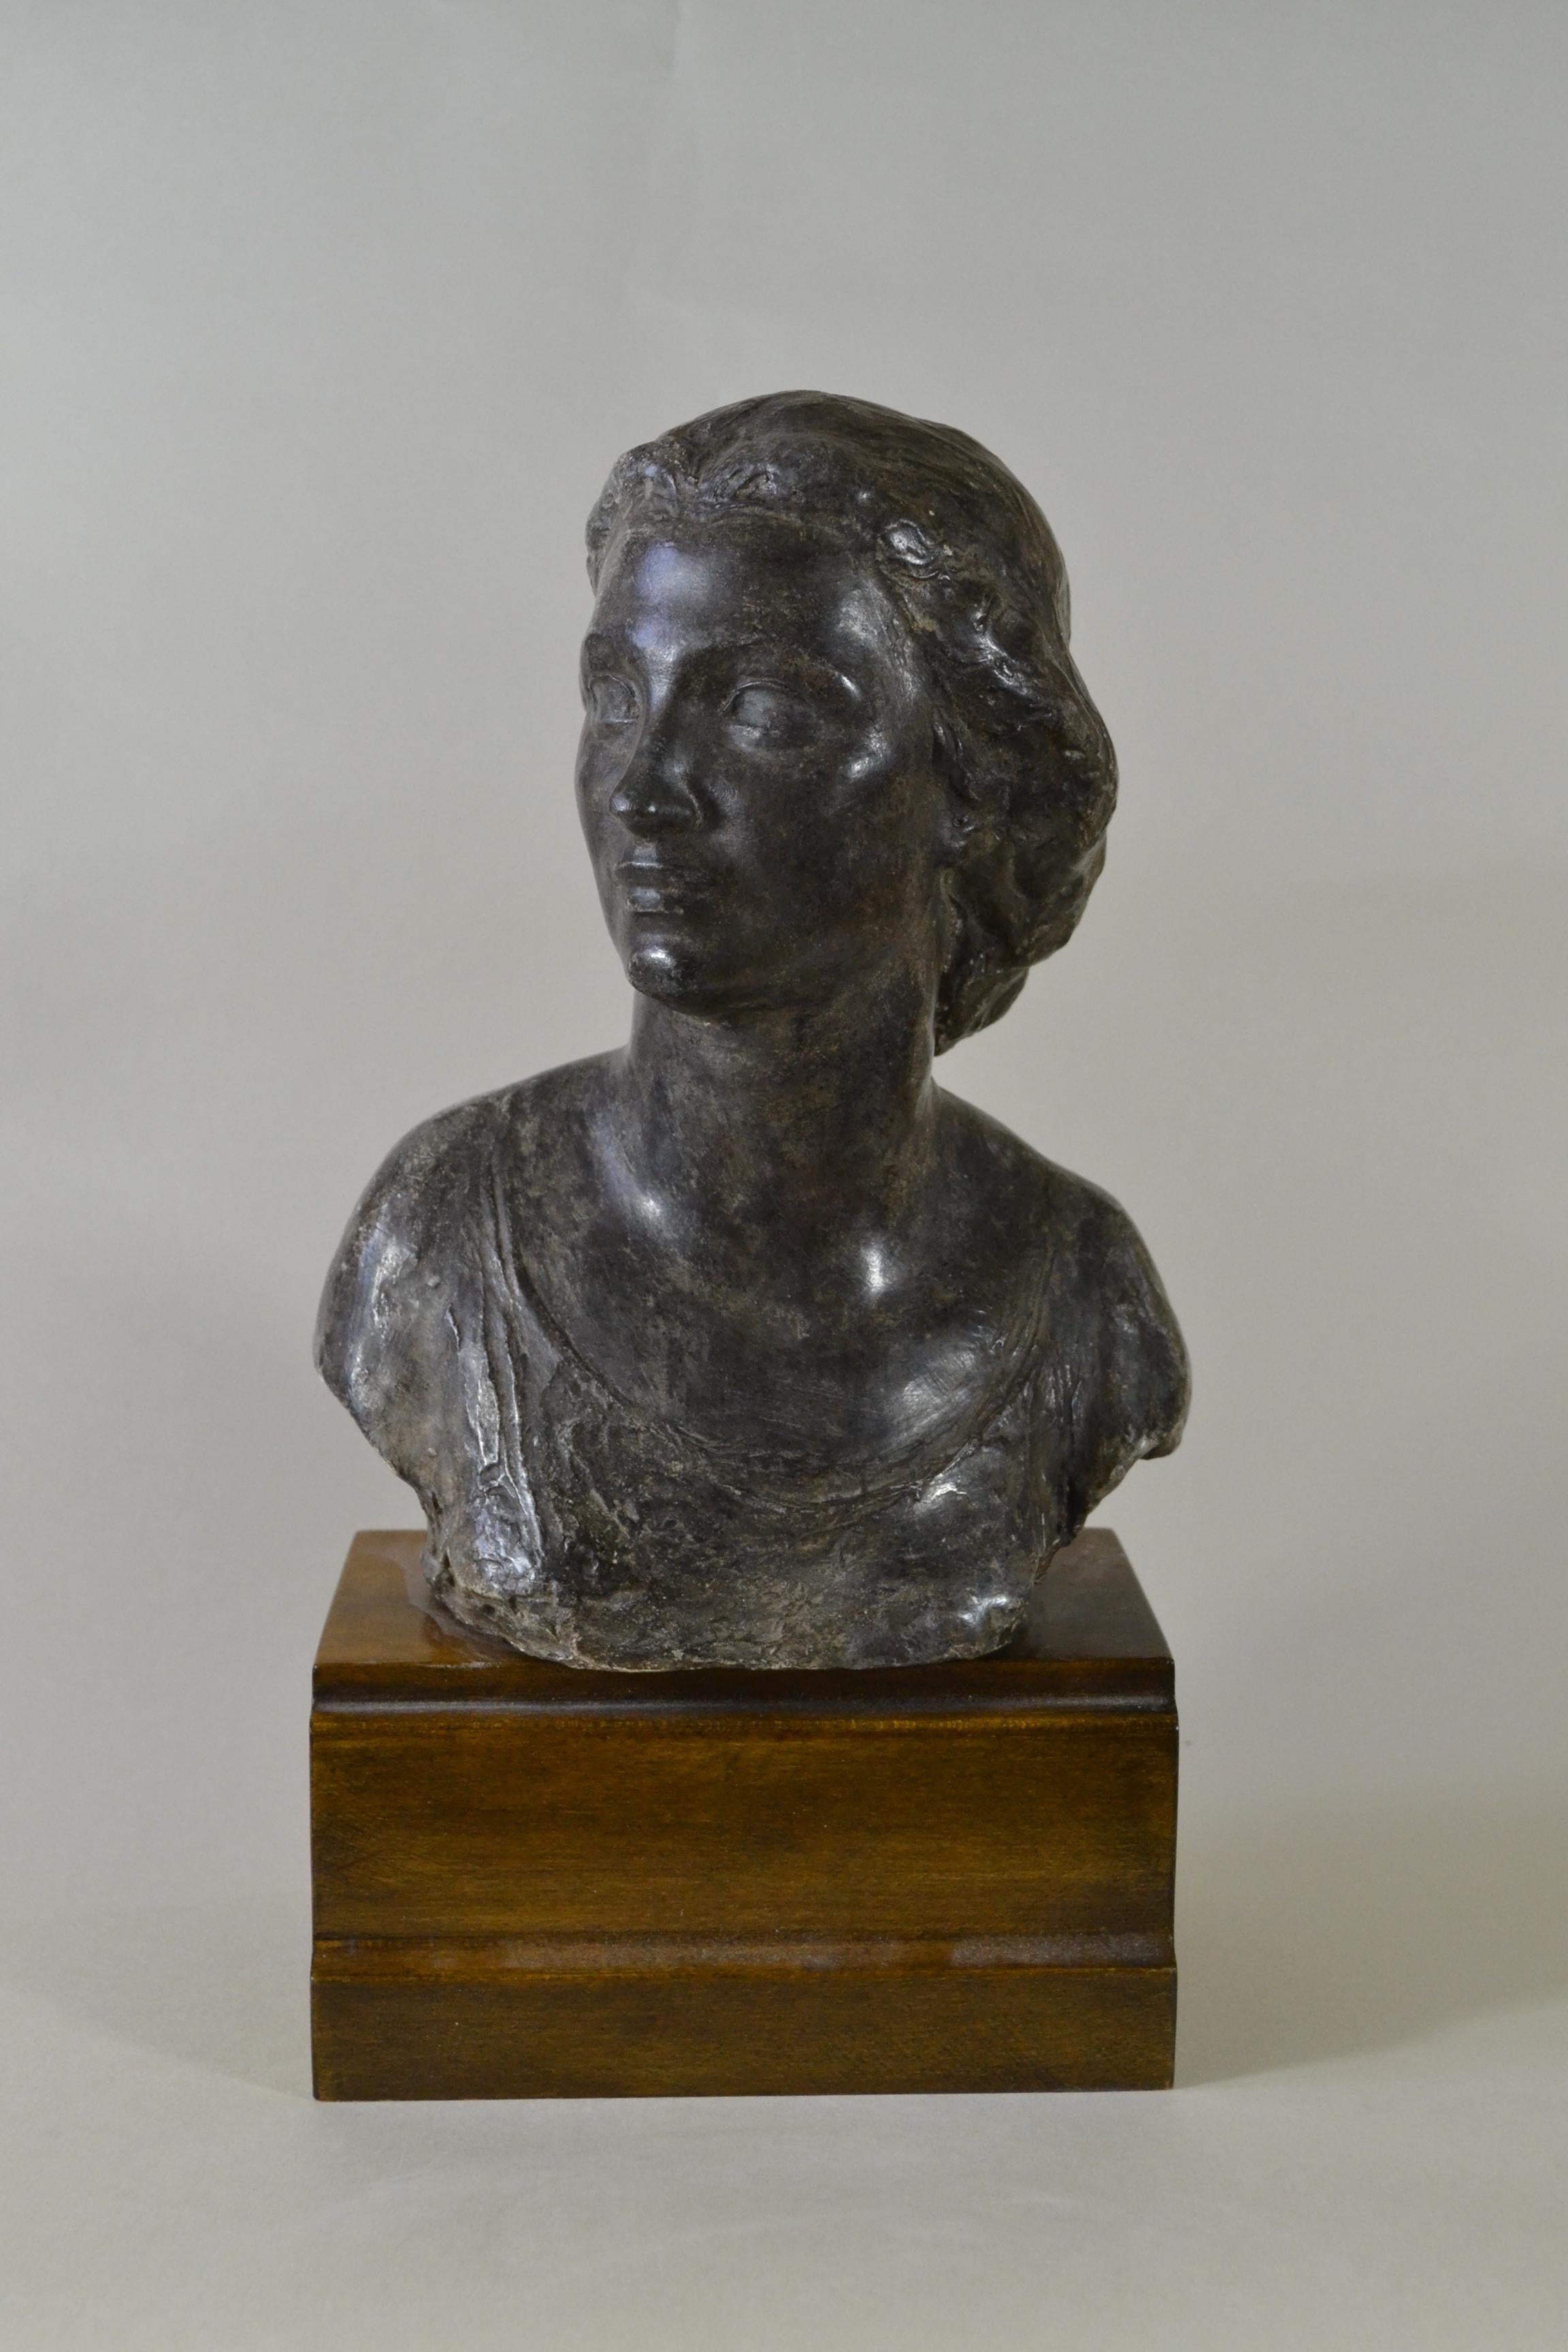 RICHARD LOUIS GARBE, RA
(1876-1957)

Alfreda, The Artist’s Daughter

Signed and dated 1956
Plaster with patinated surface on a wooden base

30 cm., 11 ¾ in. high

Provenance:
Gifted by Richard Garbe to his brother Gilbert Garbe and thence by